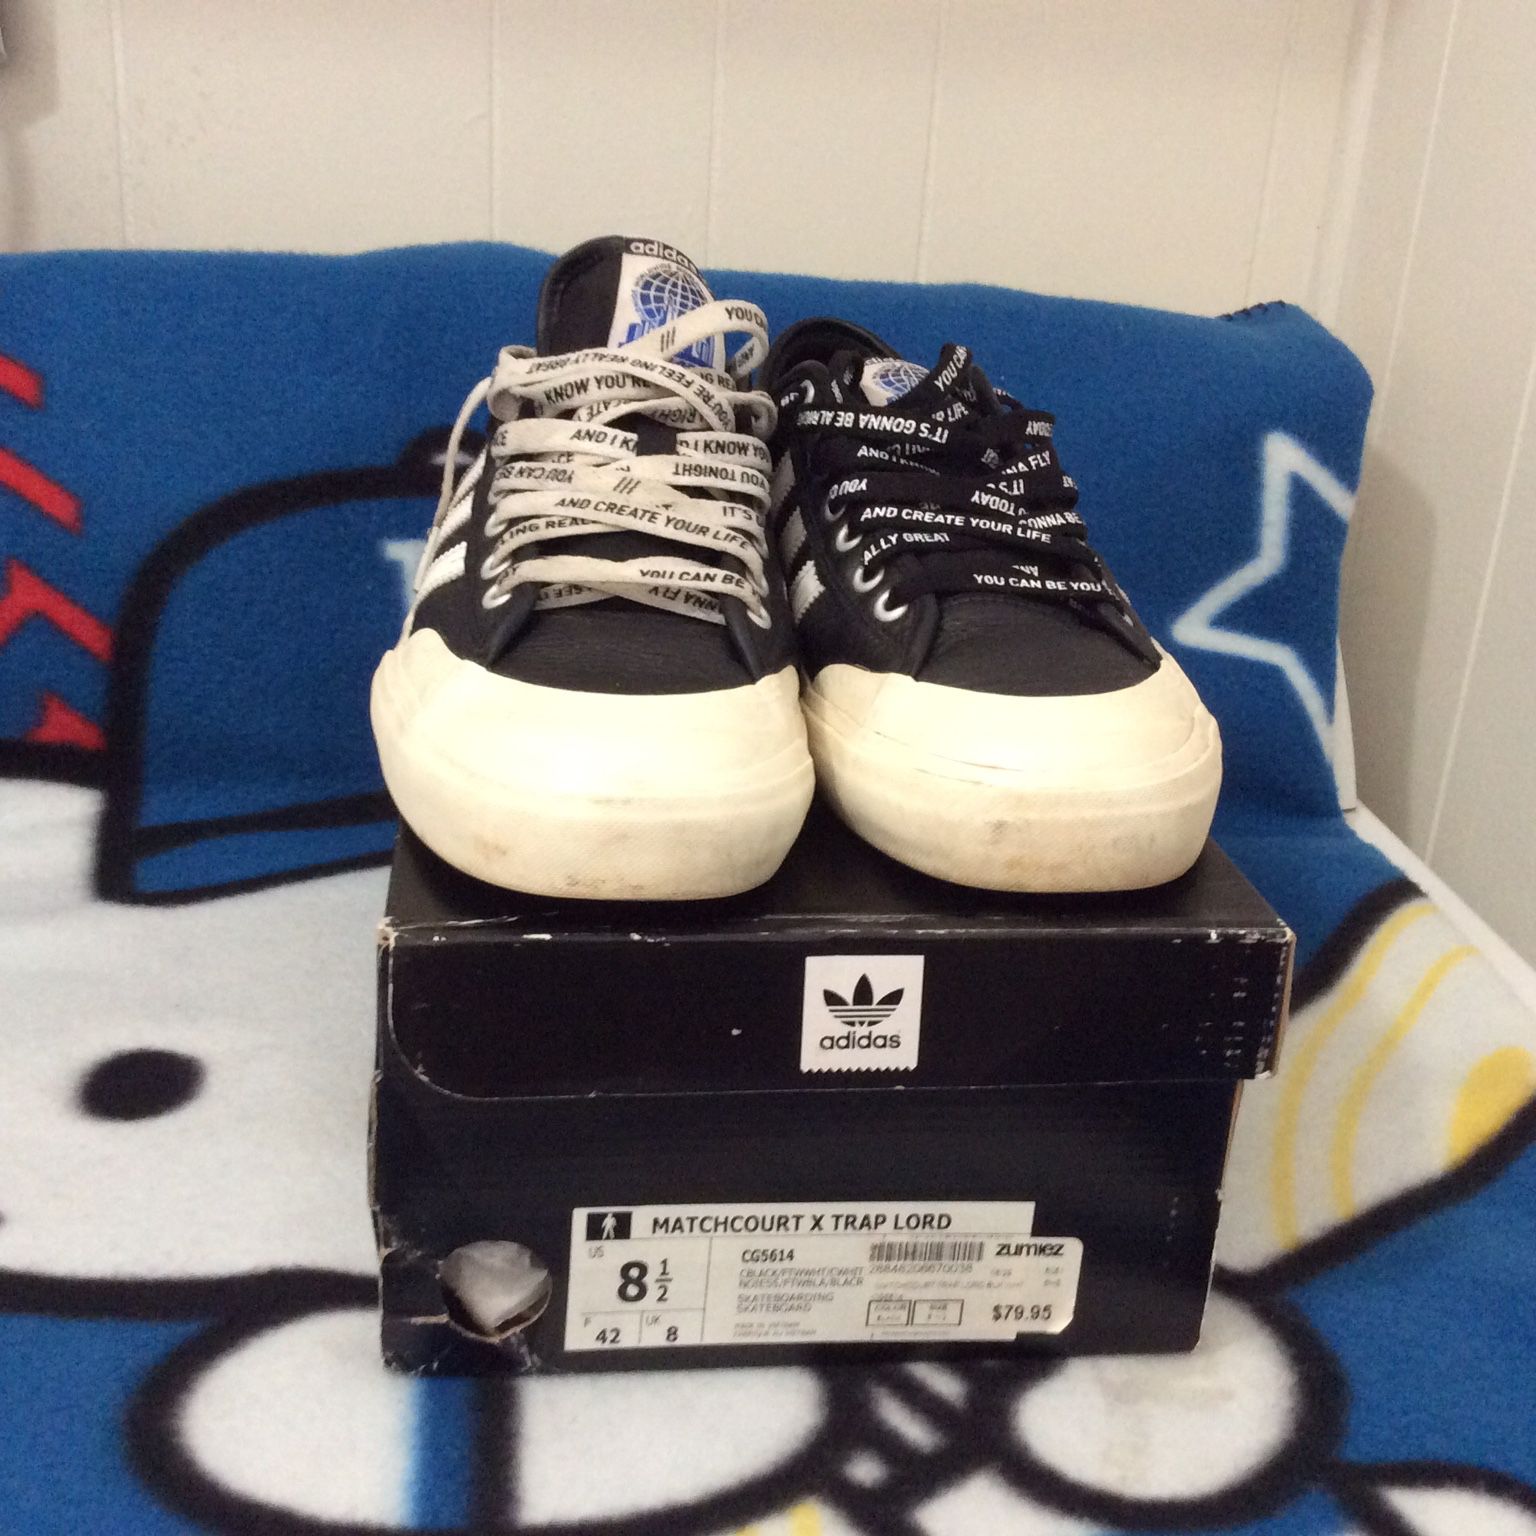 Adidas MatchCourt X Trap Lord Size 8 for Sale in Oxnard, CA OfferUp